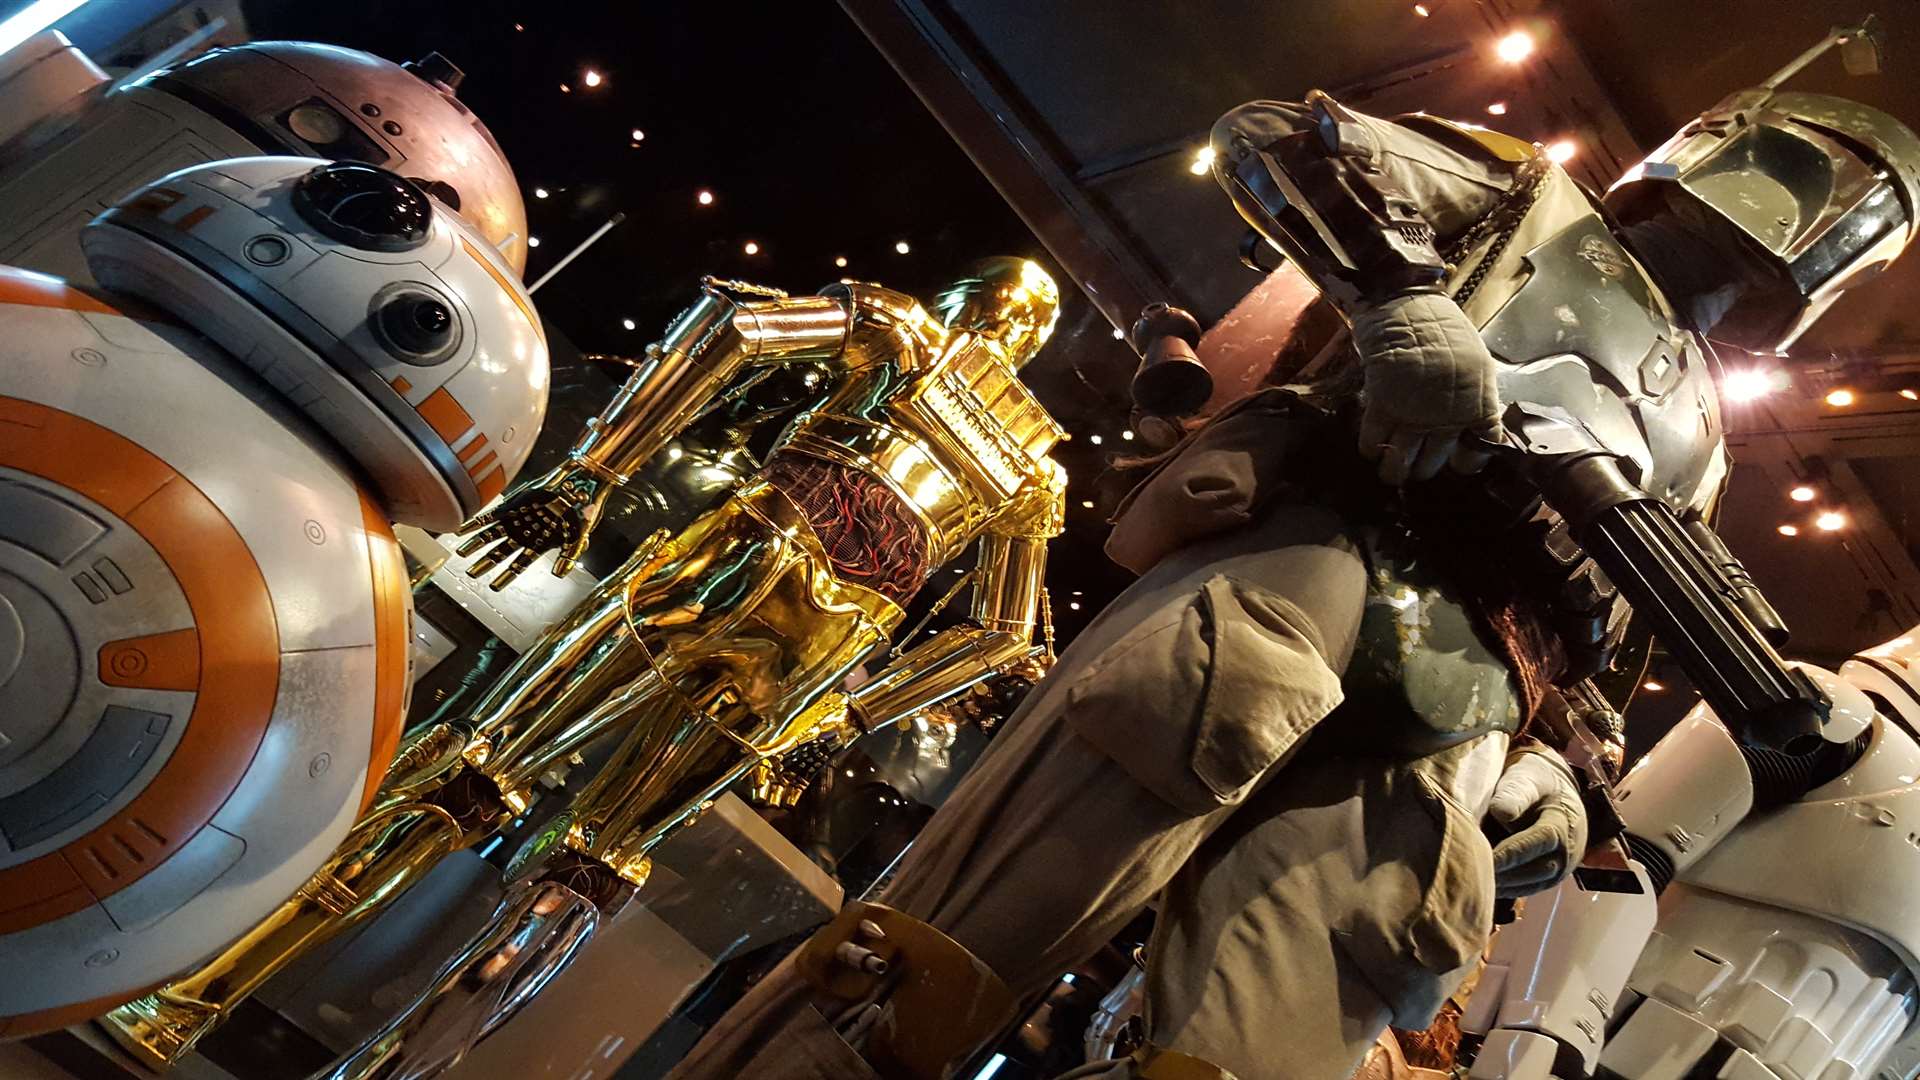 BB-8 next to Boba Fett at the Star Wars Identities exhibition at the O2